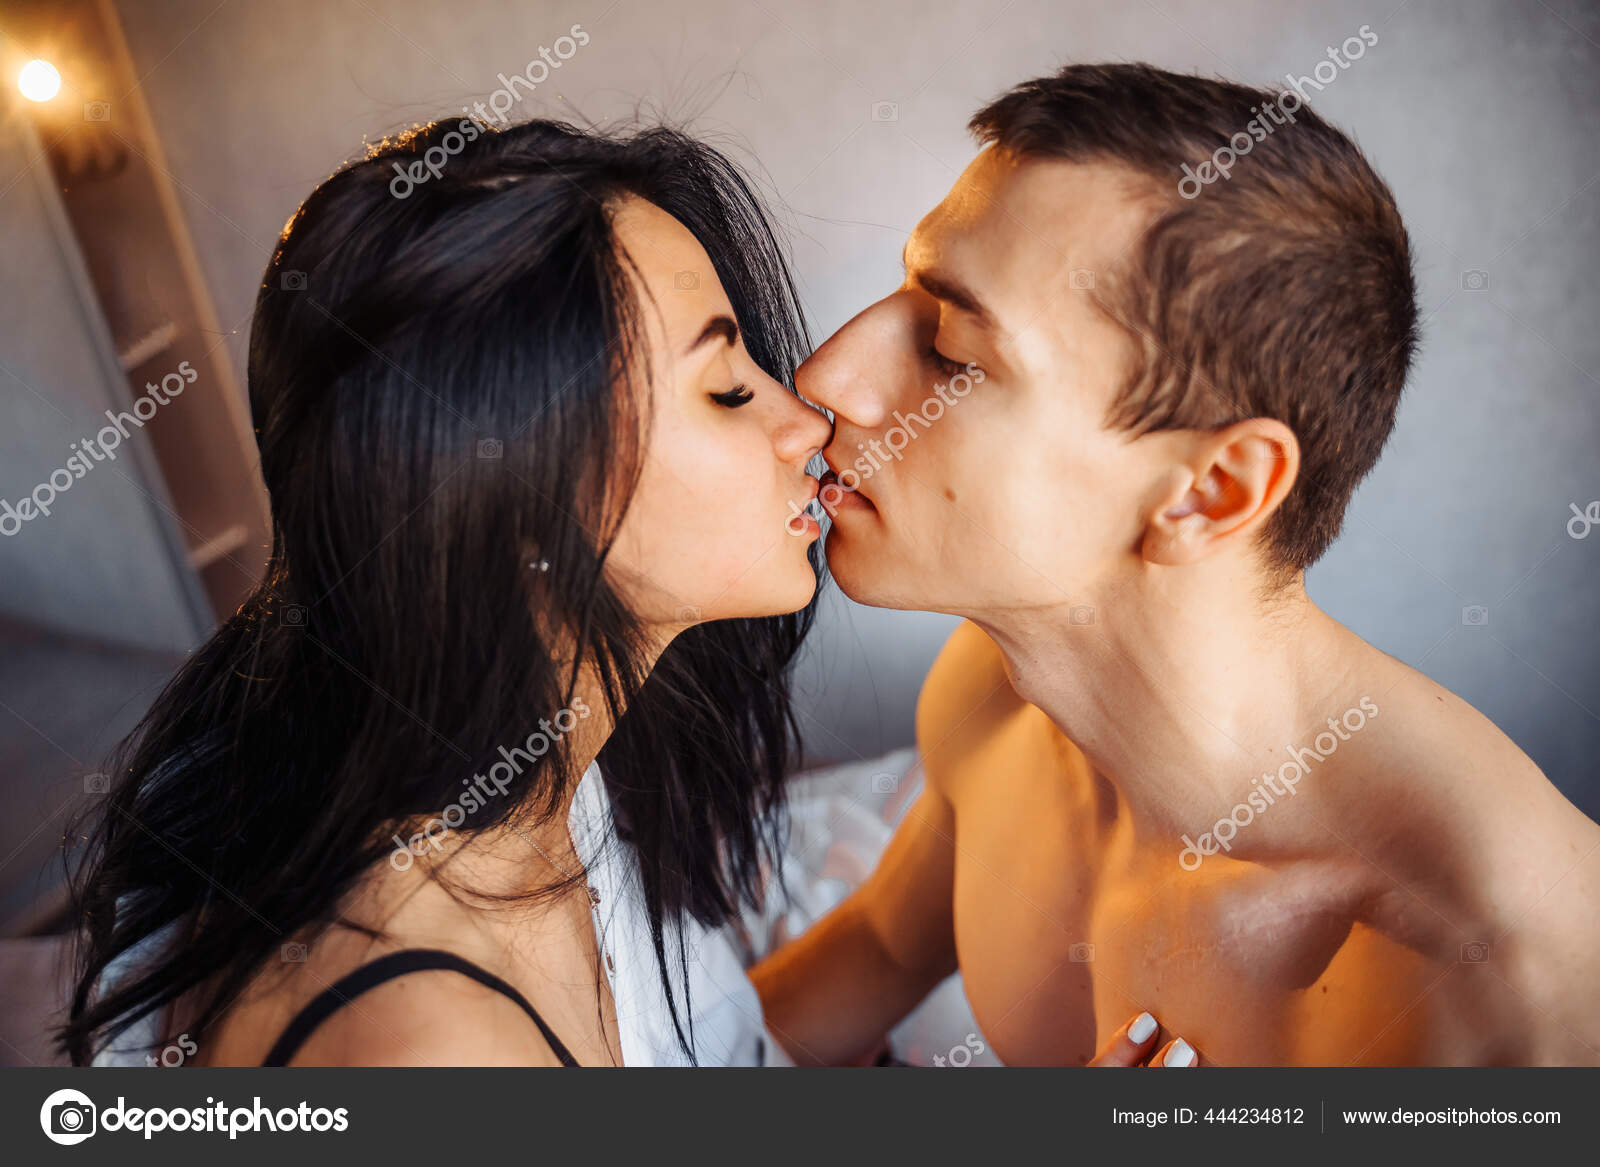 Close Beautiful Nude Couple Two Young People Love Having Sex Stock Photo by ©dariaagaf 444234812 image image